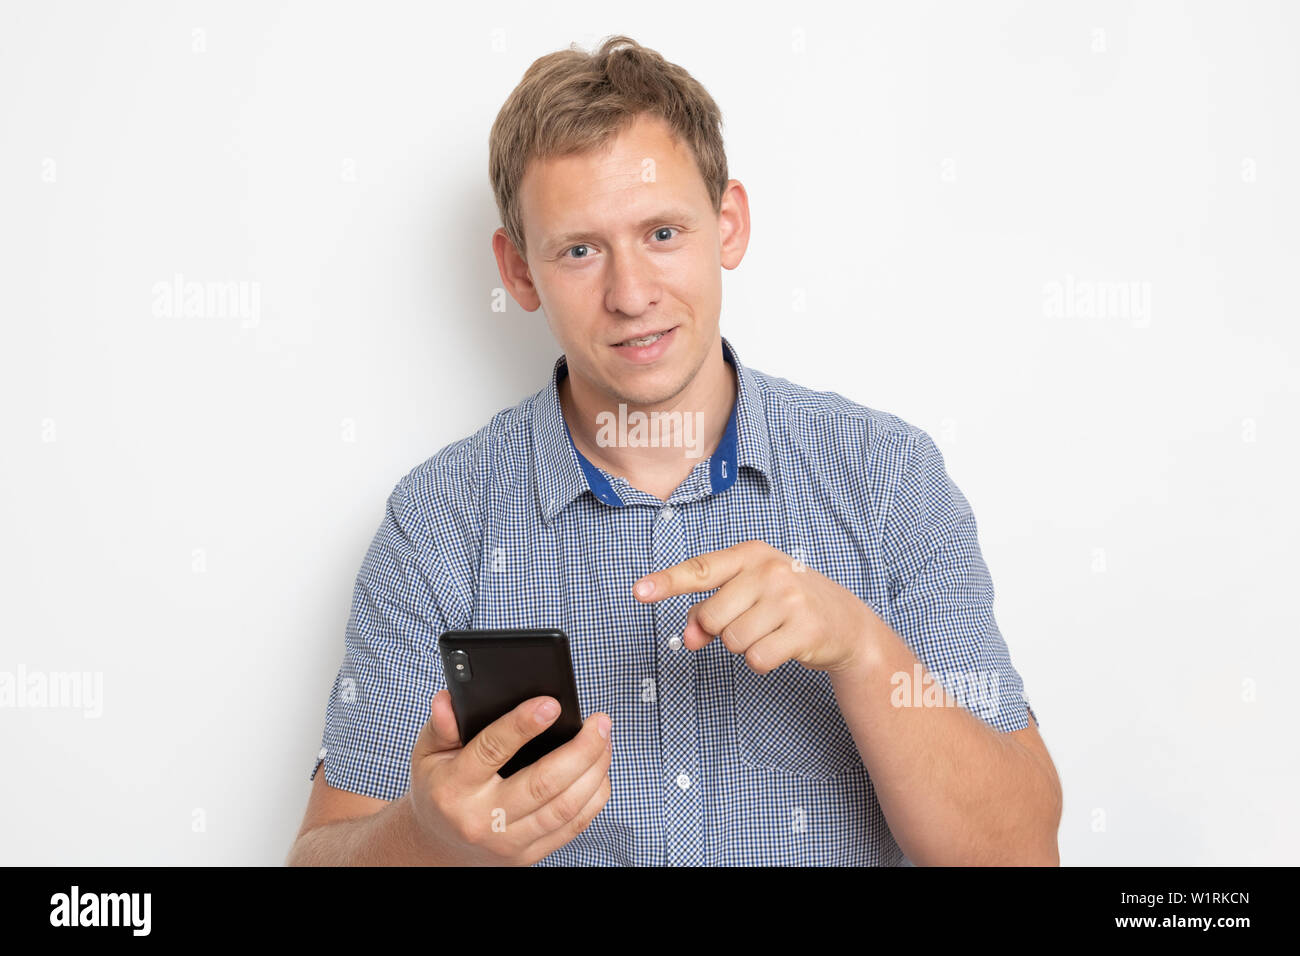 Description: Daylight Portrait of young European Caucasian isolated on white background wearing blue shirt standing in front of camera, with phone in Stock Photo